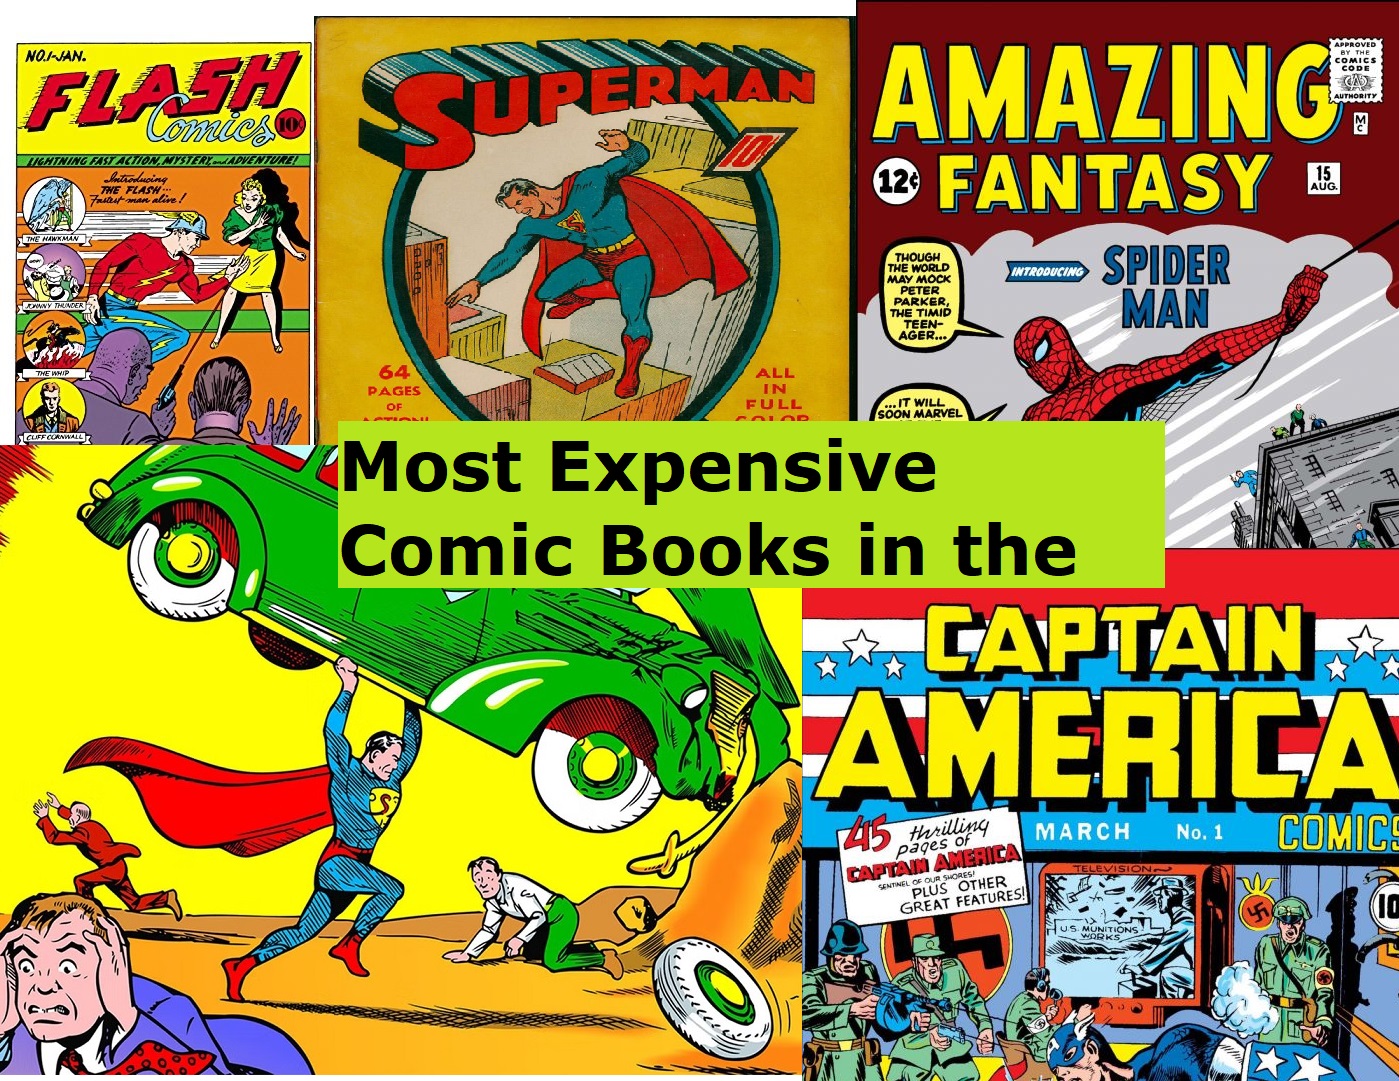 Most Expensive Comic Books in the World